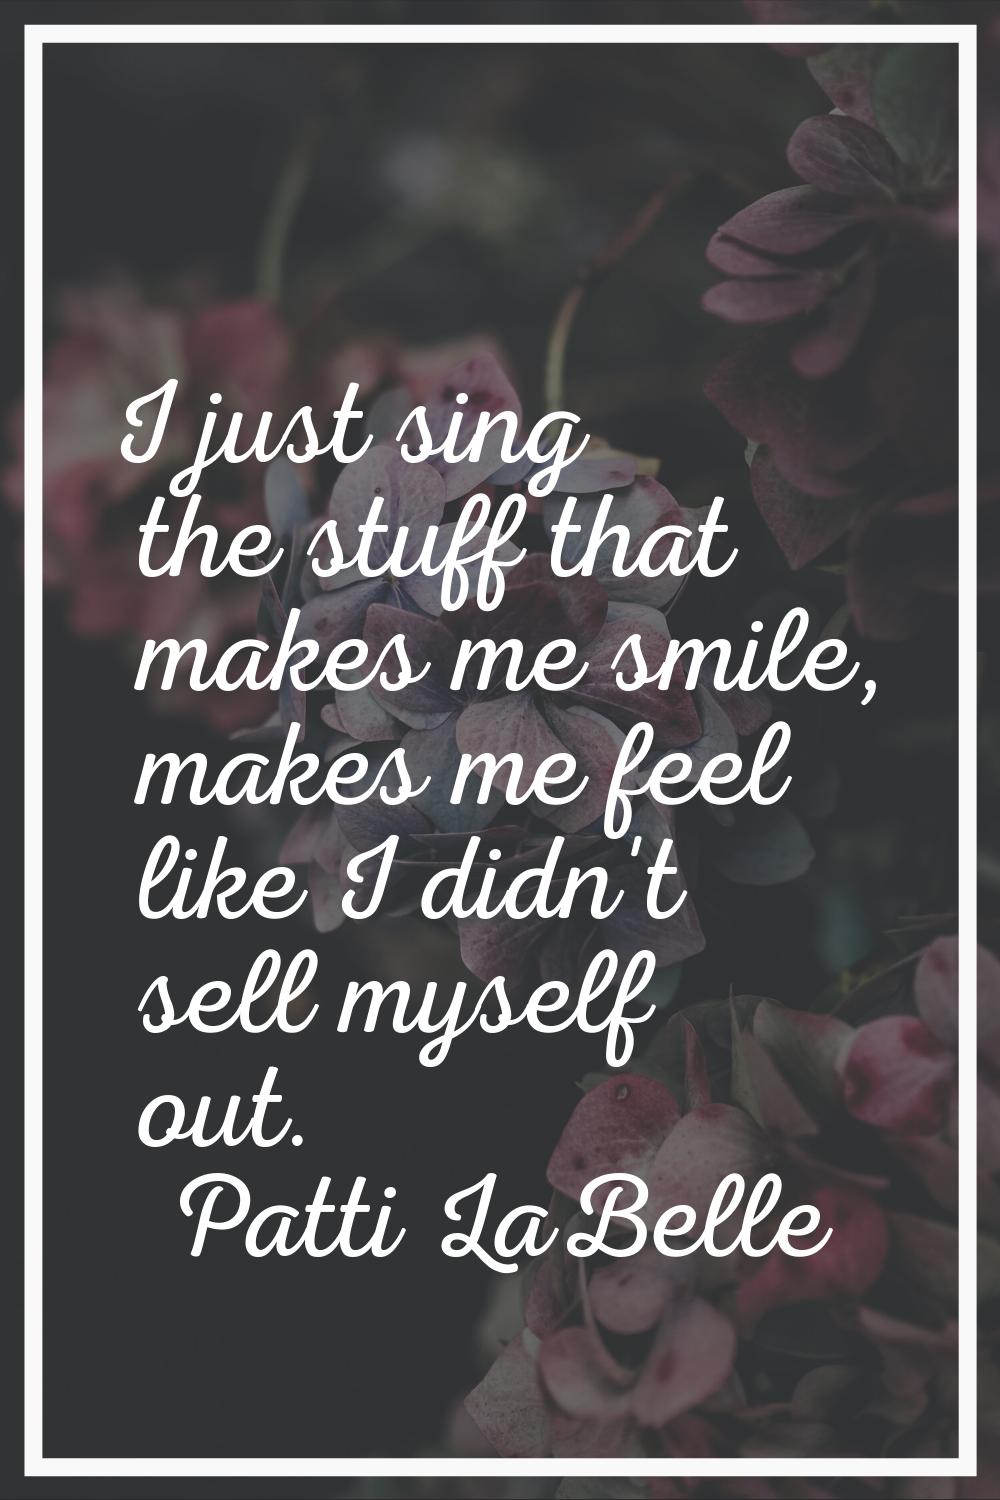 I just sing the stuff that makes me smile, makes me feel like I didn't sell myself out.